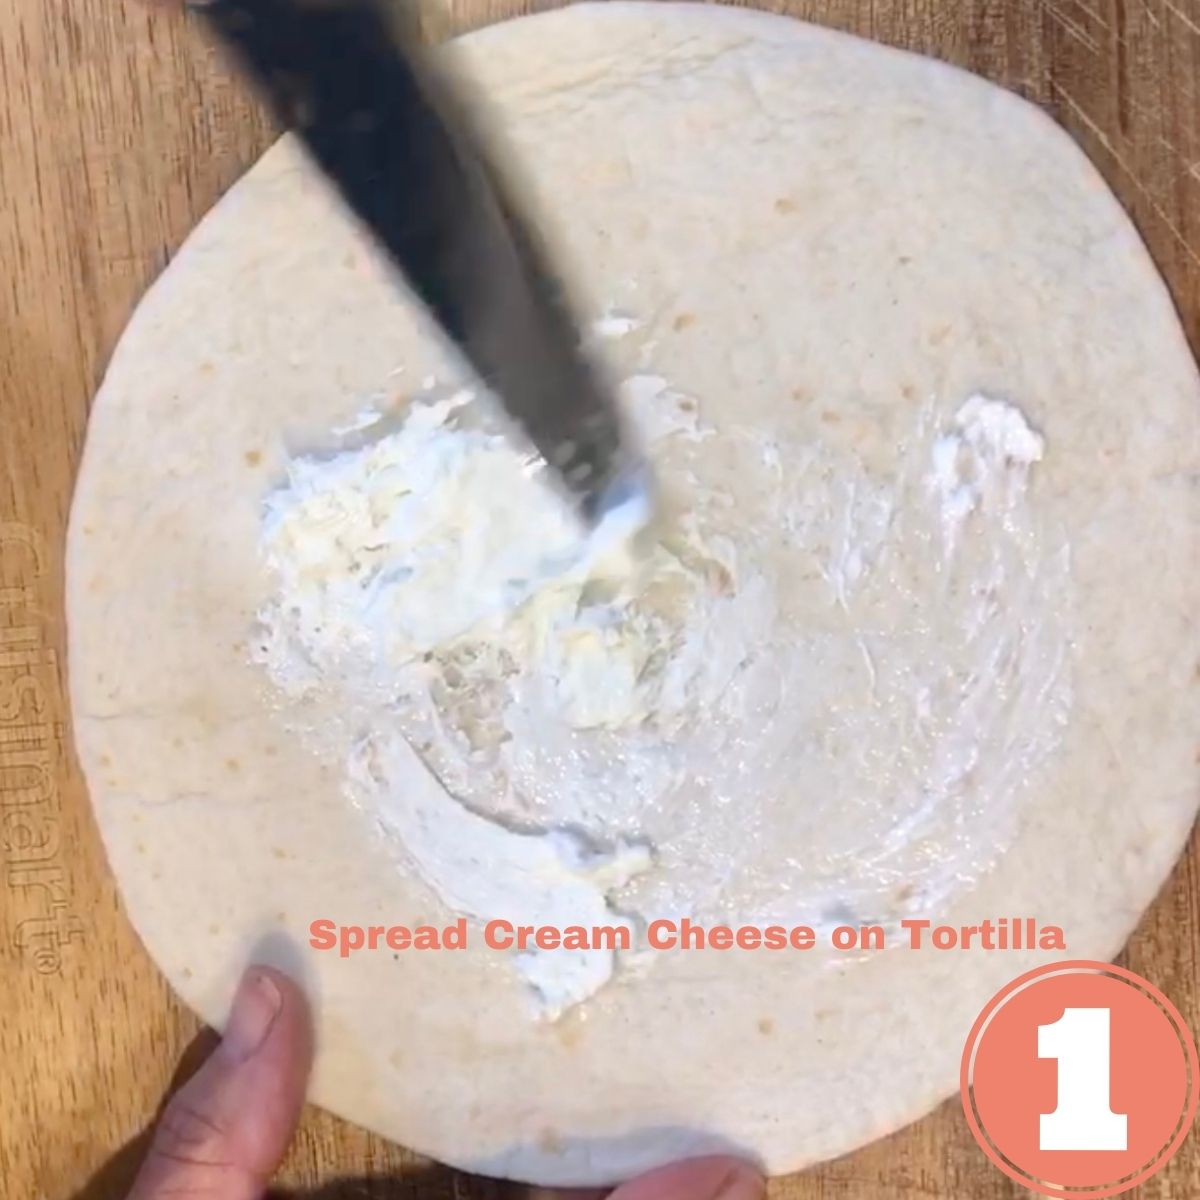 A butter knife spreading cream cheese on a tortilla